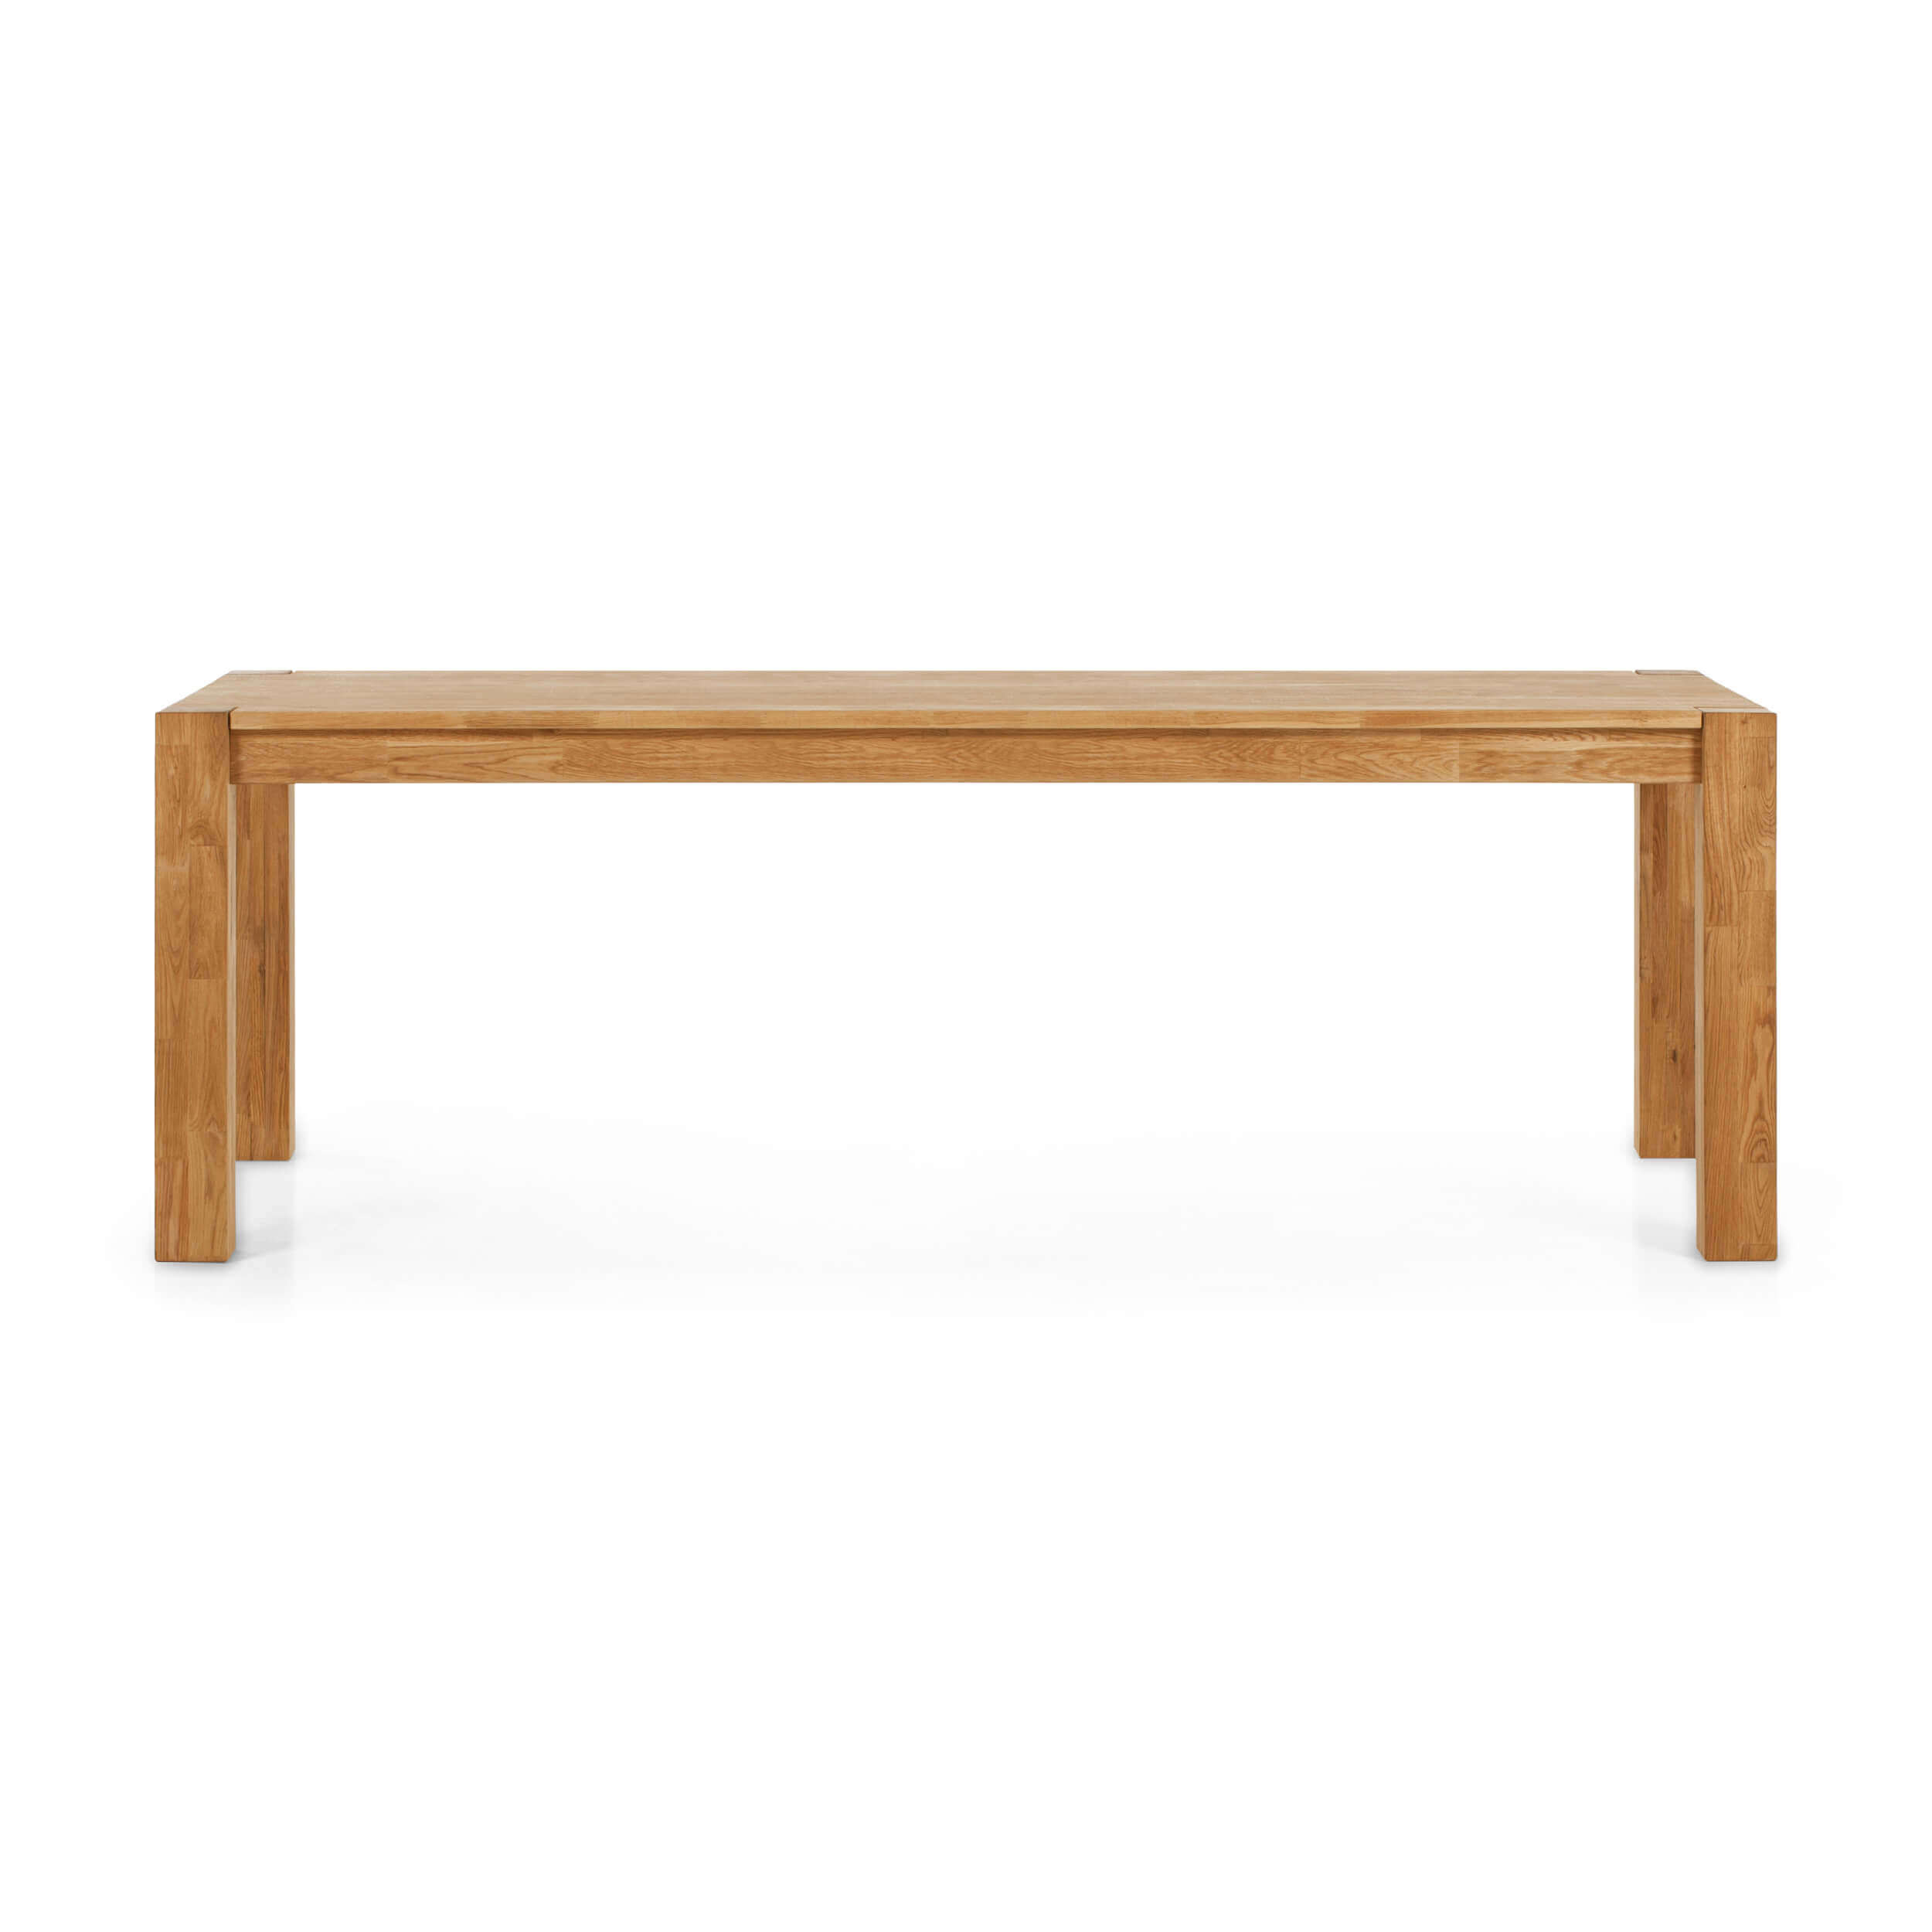 Harvest Dining Table Modern Rustic Dining Table Eq3